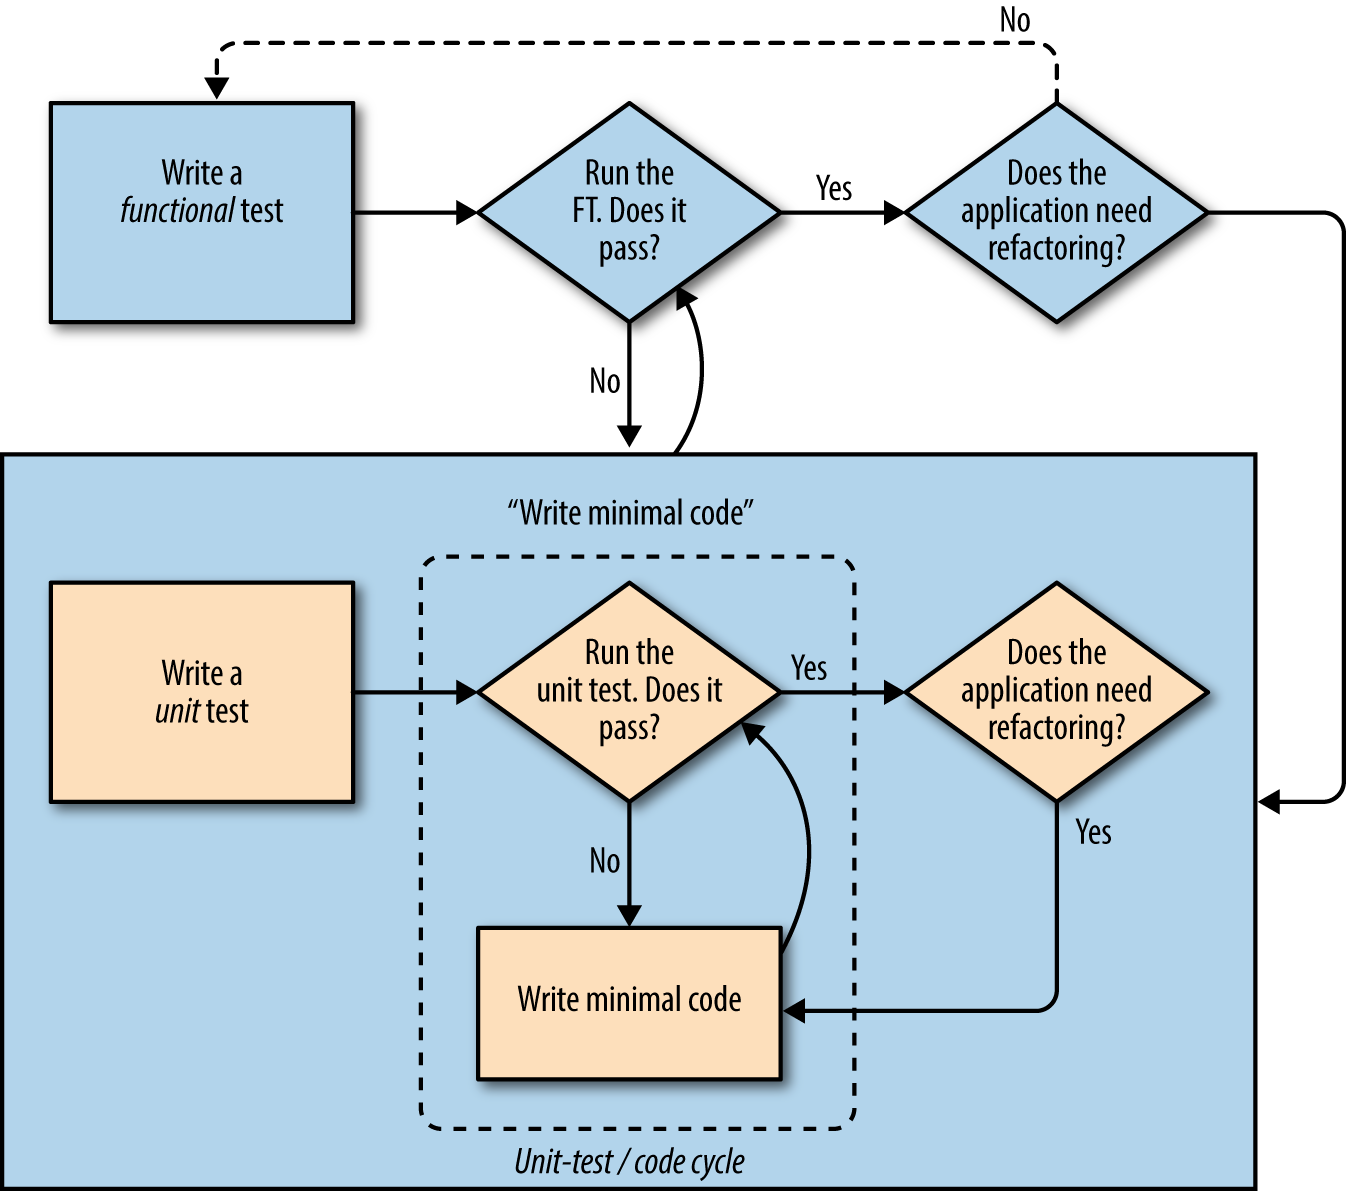 A flowchart showing functional tests as the overall cycle, and unit tests helping to code